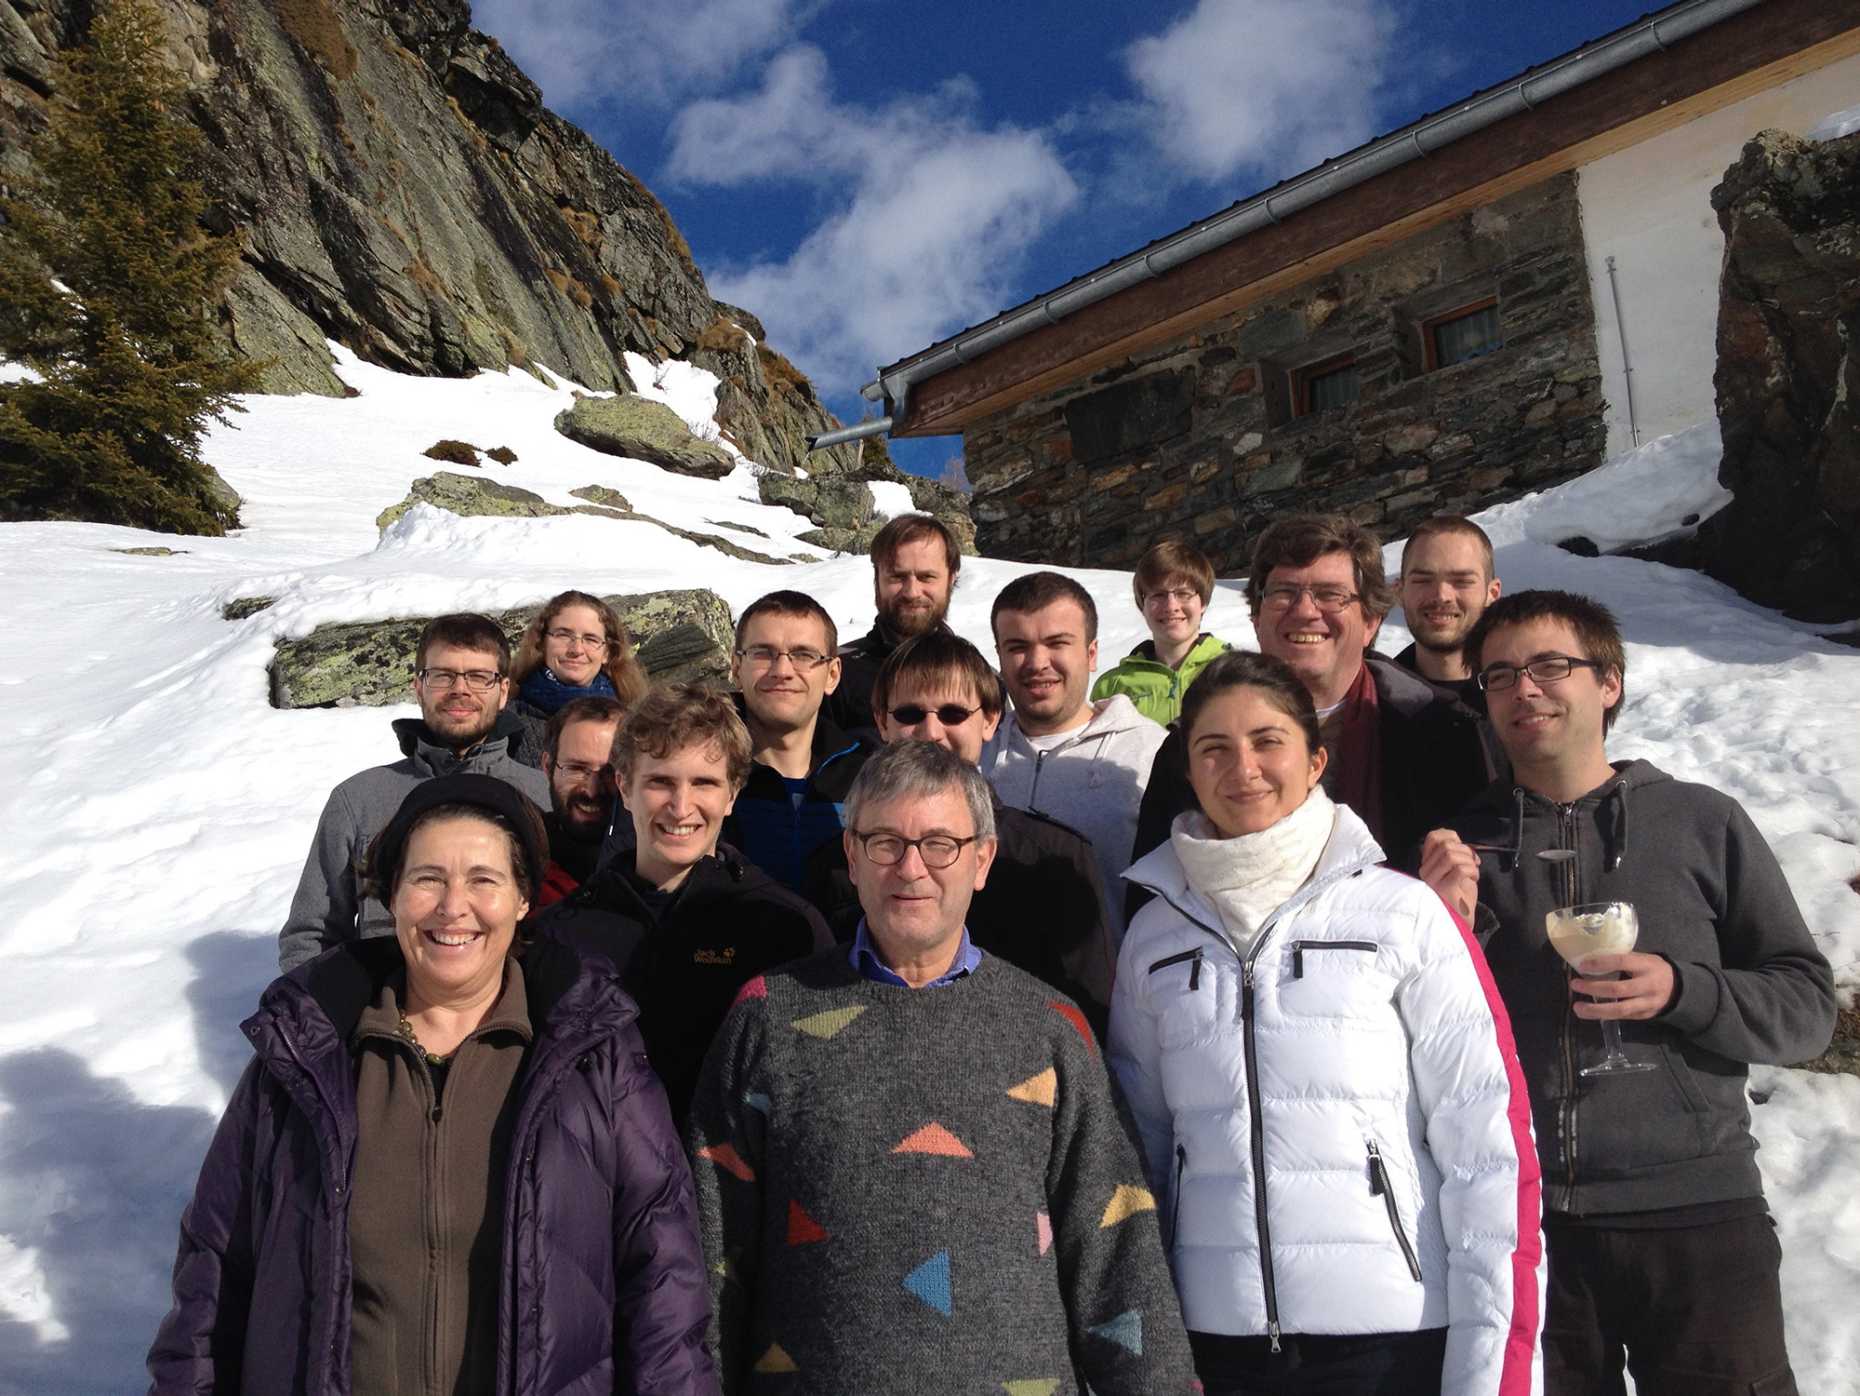 Organising team retreats for research groups was one of Berger's (first from left) favourite tasks, such as this mountain retreat with the groups of professors Widmayer and Arbenz.